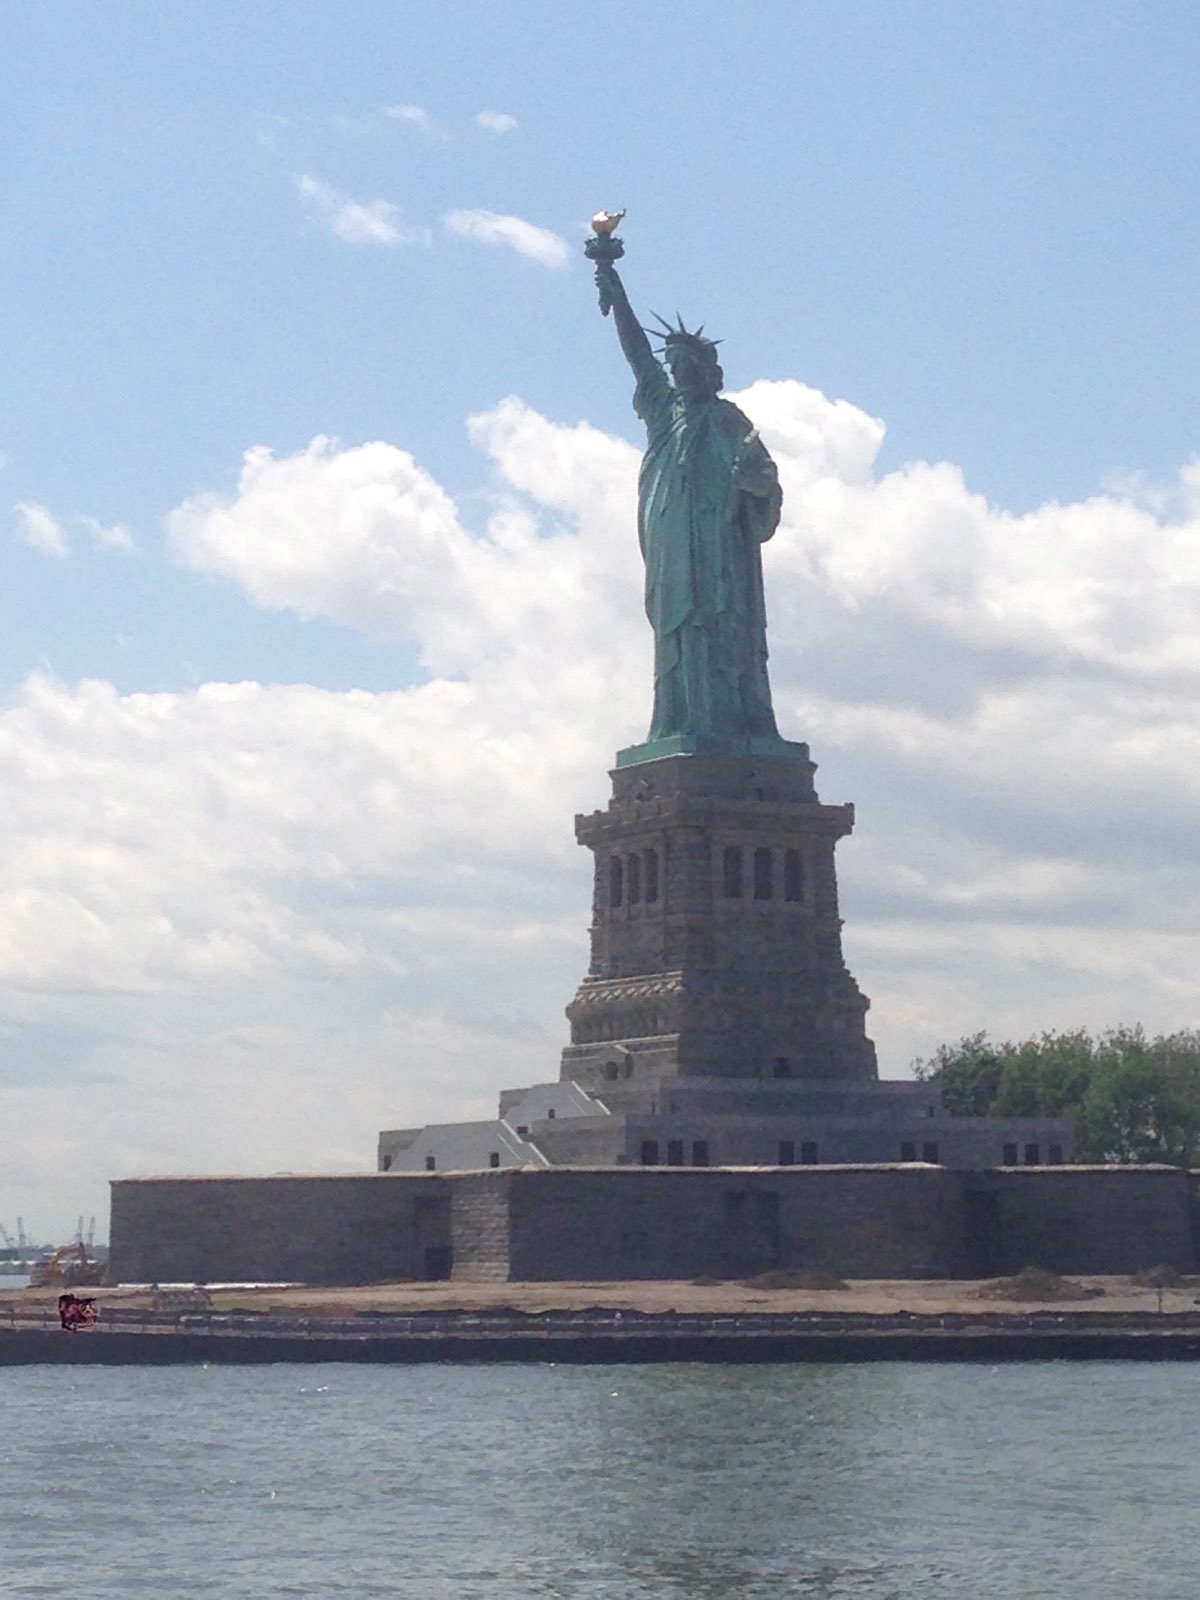 Arriving to Statue of Liberty